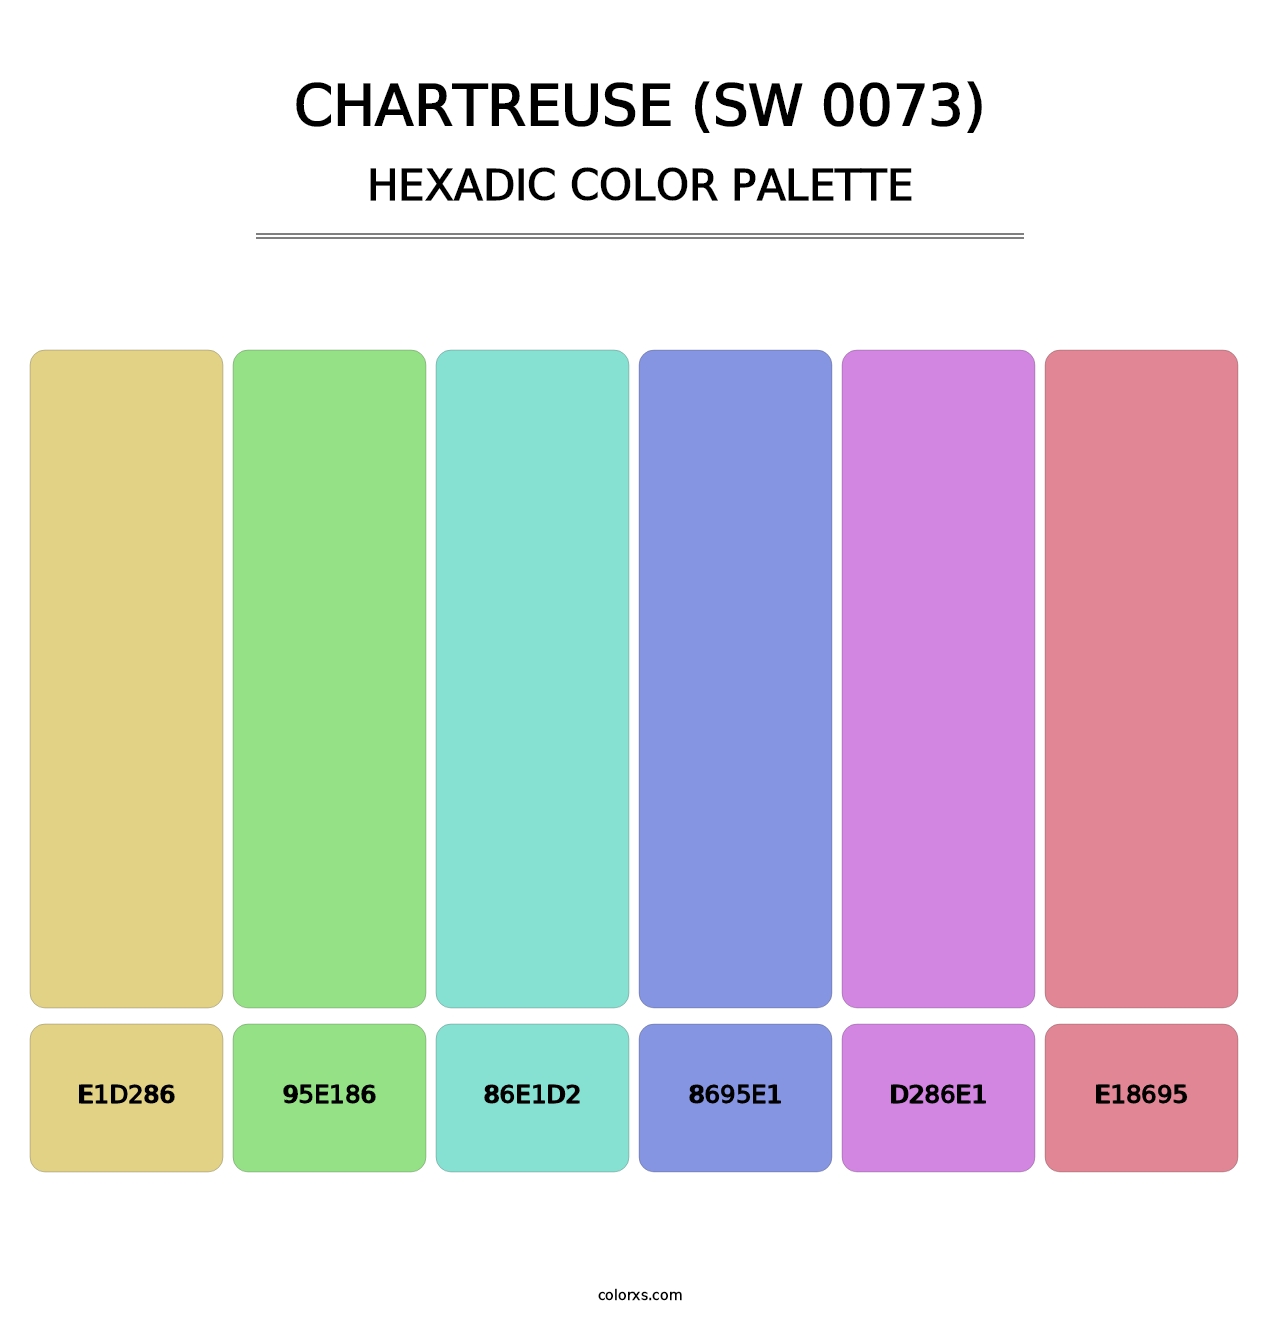 Chartreuse (SW 0073) - Hexadic Color Palette